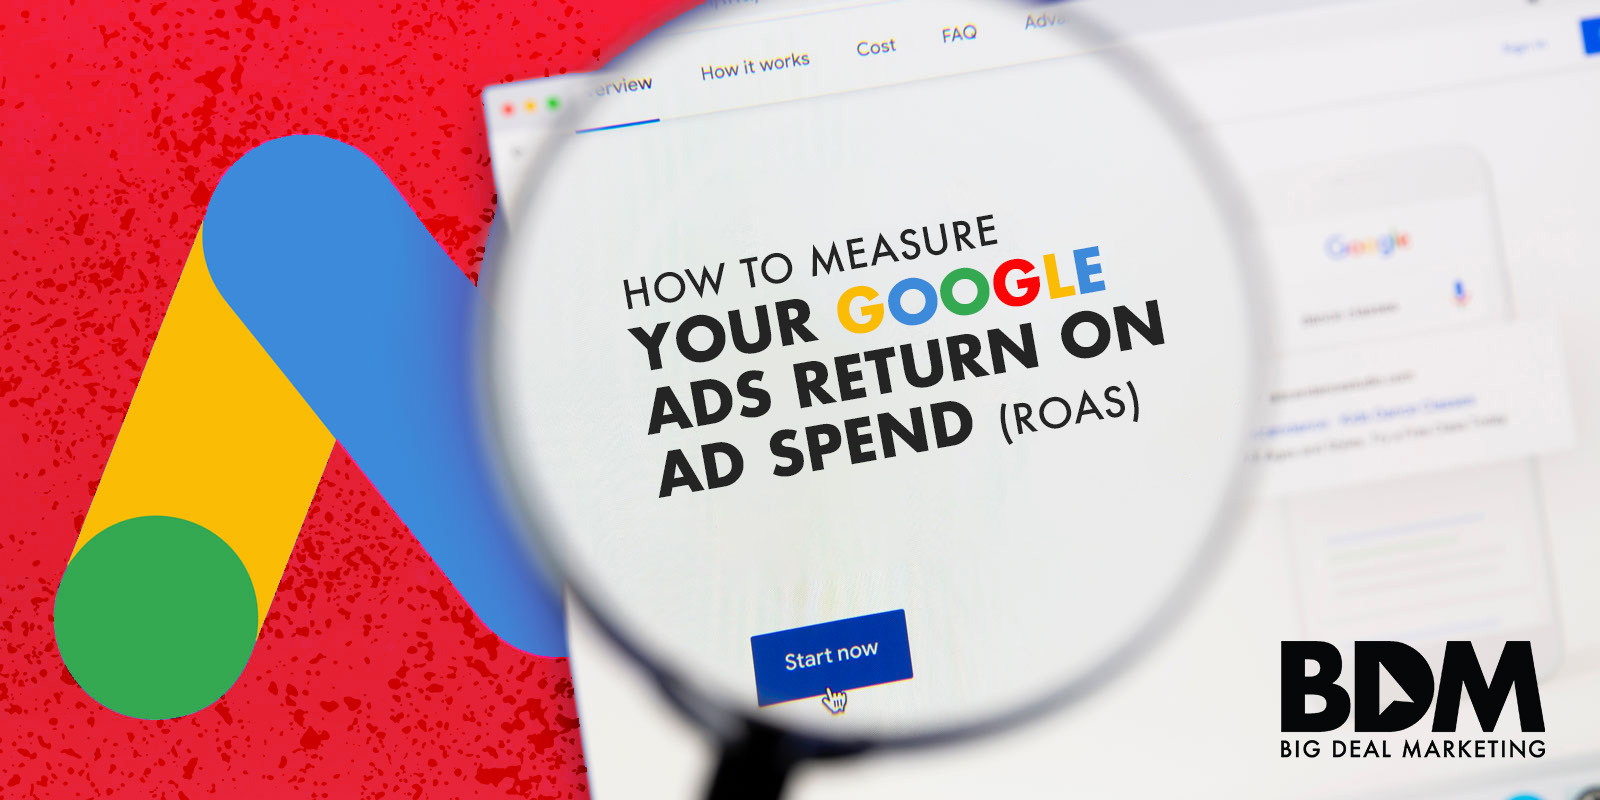 How to measure your google ads return on spend (ROAS)